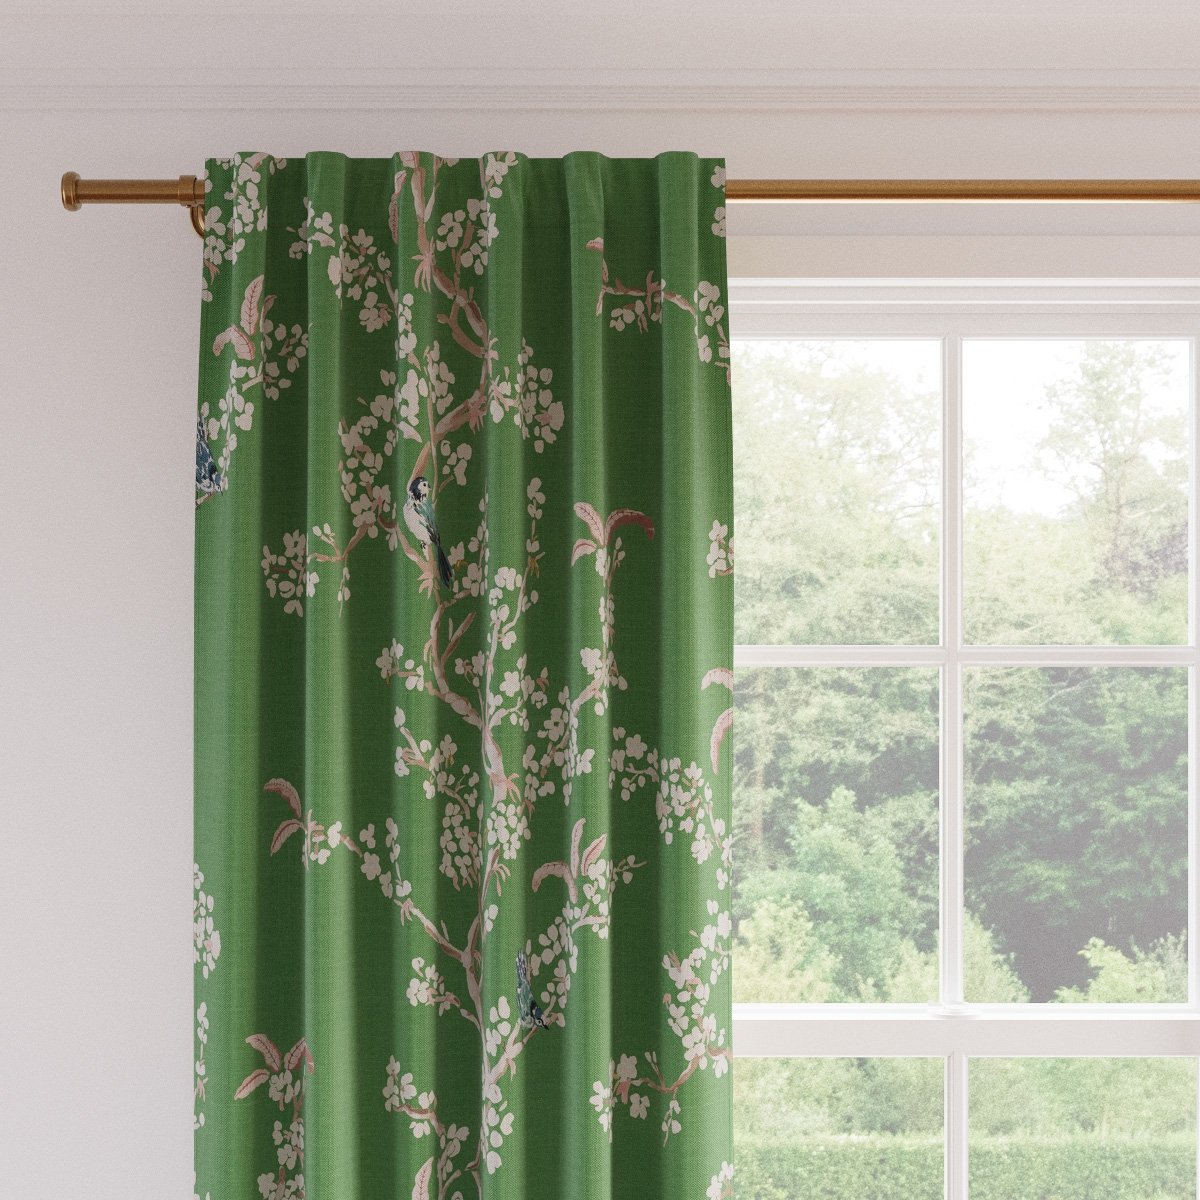 Printed Linen Curtain, Jade Cherry Blossom, 50" x 96", Privacy - Image 1